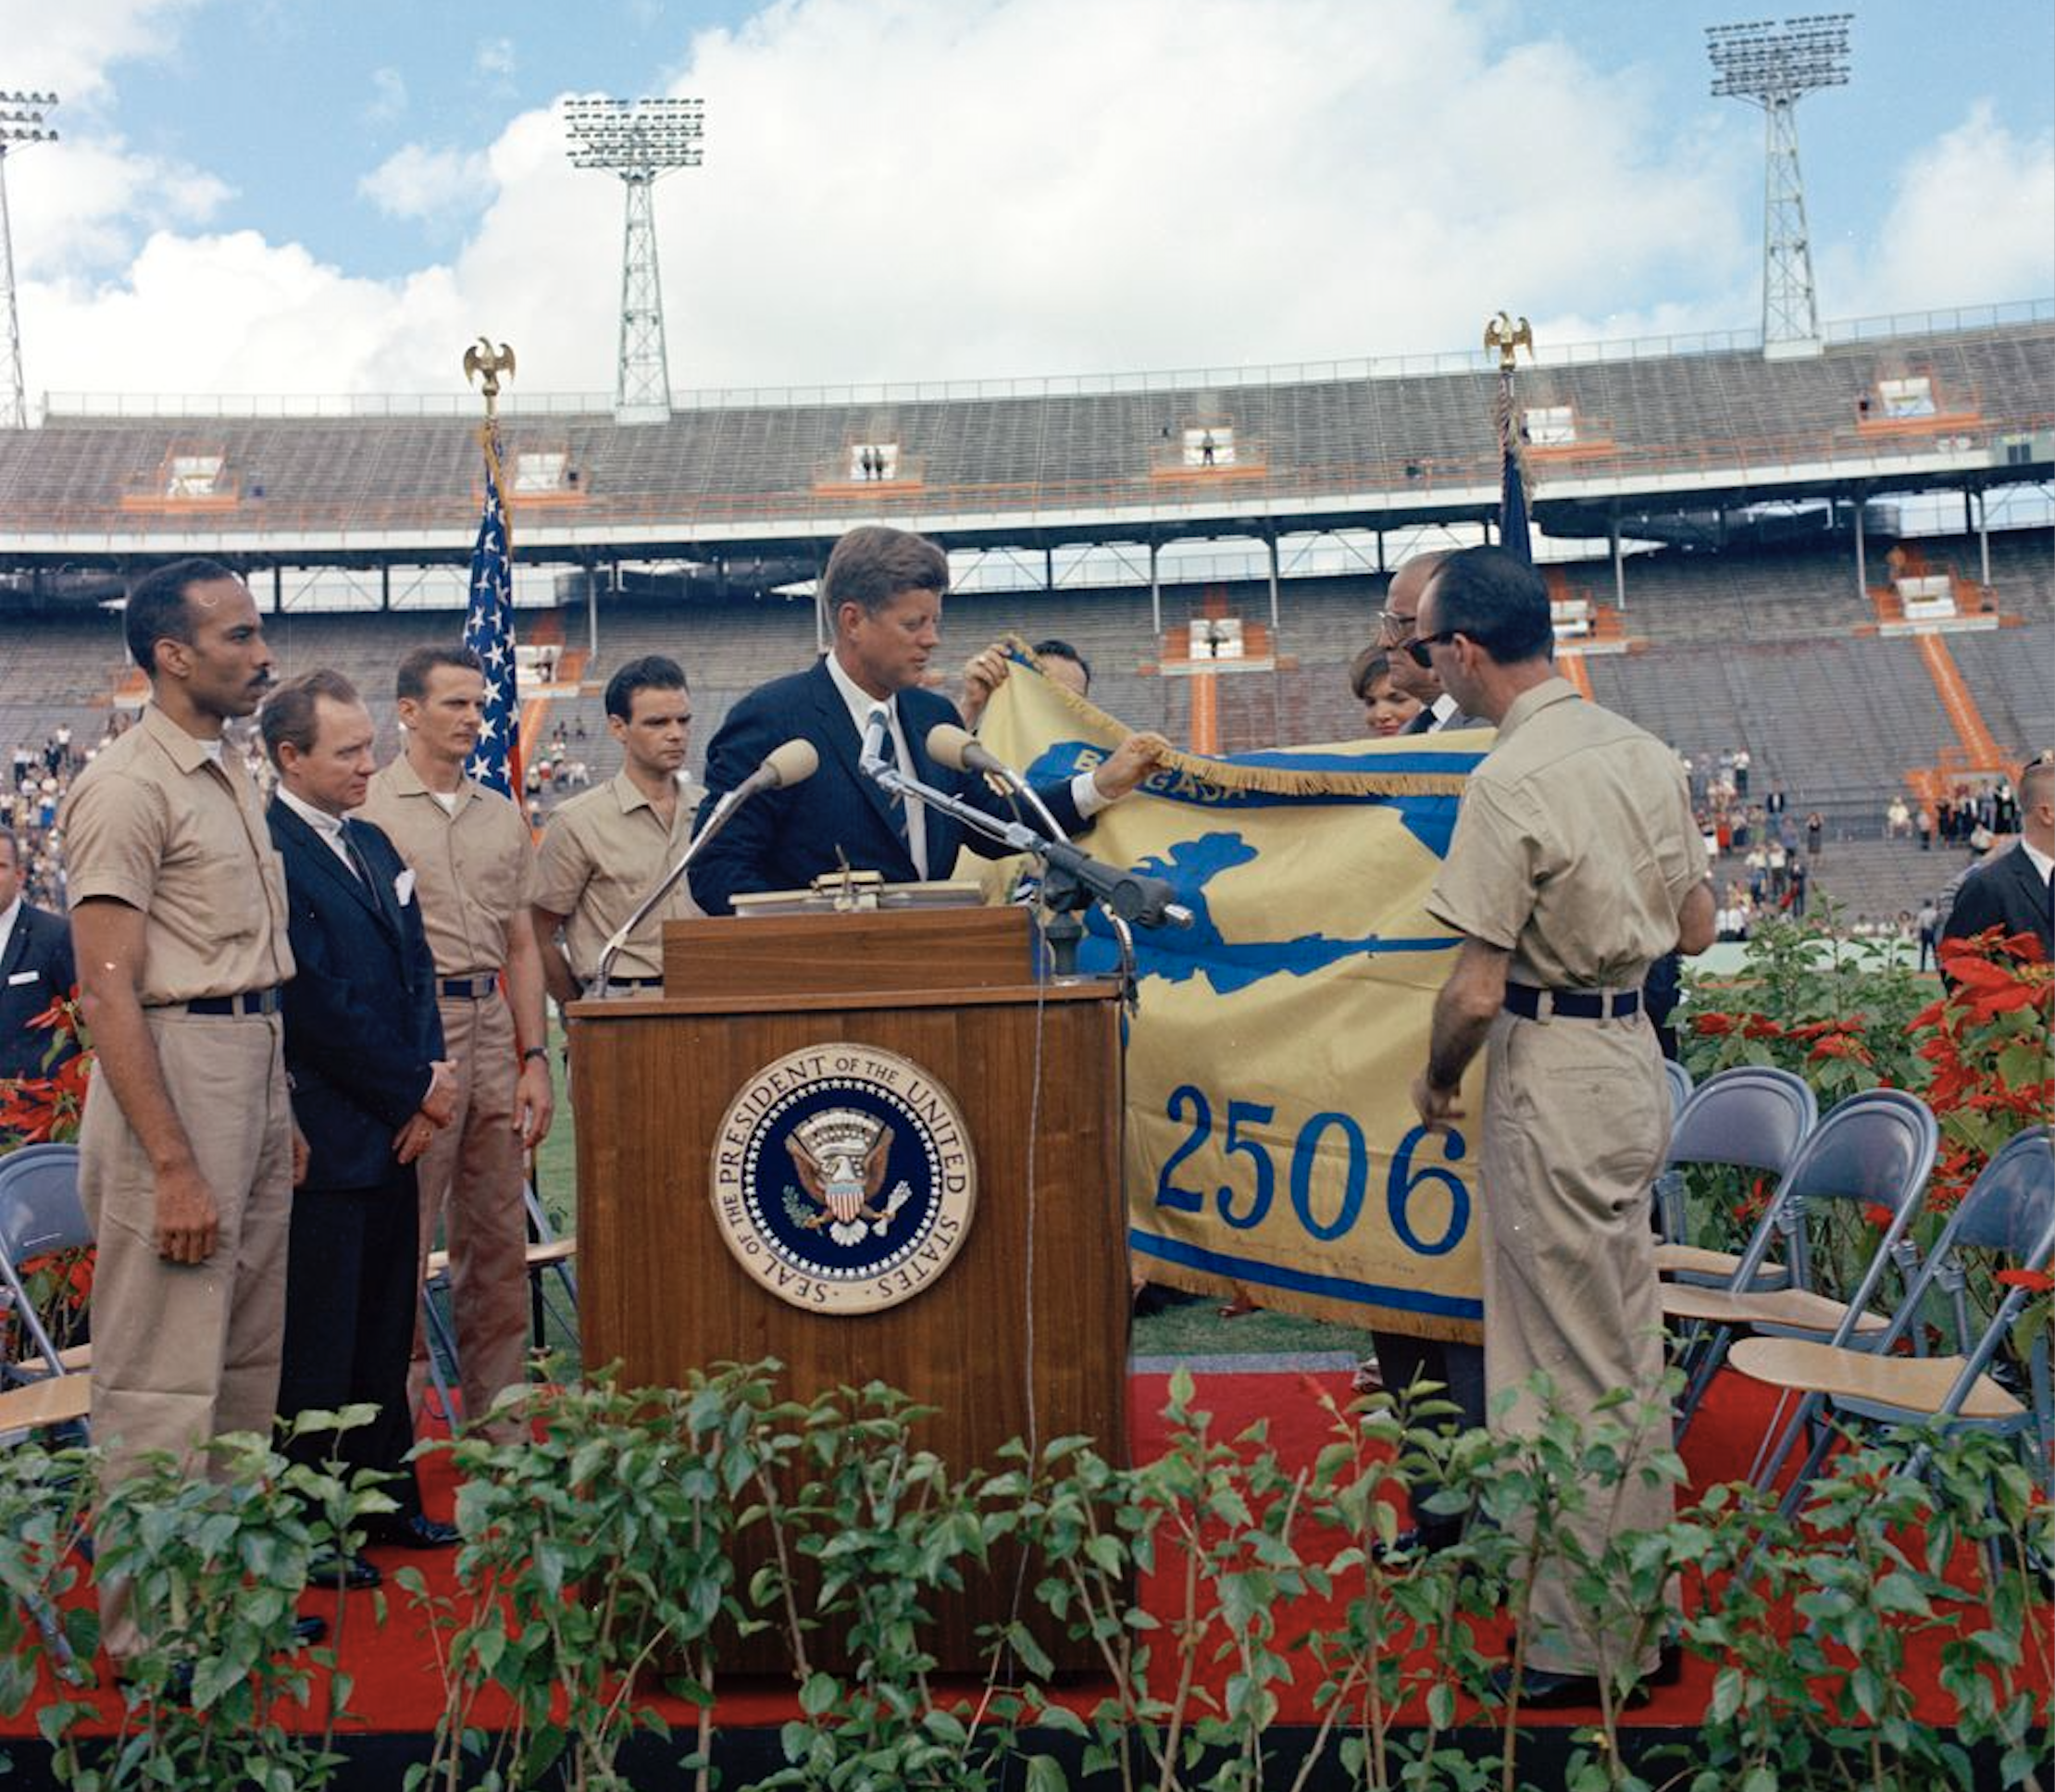 President John F. Kennedy receives the flag of the 2506th Cuban Invasion Brigade from brigade members during a presentation ceremony at the Orange Bowl Stadium in Miami, Florida.